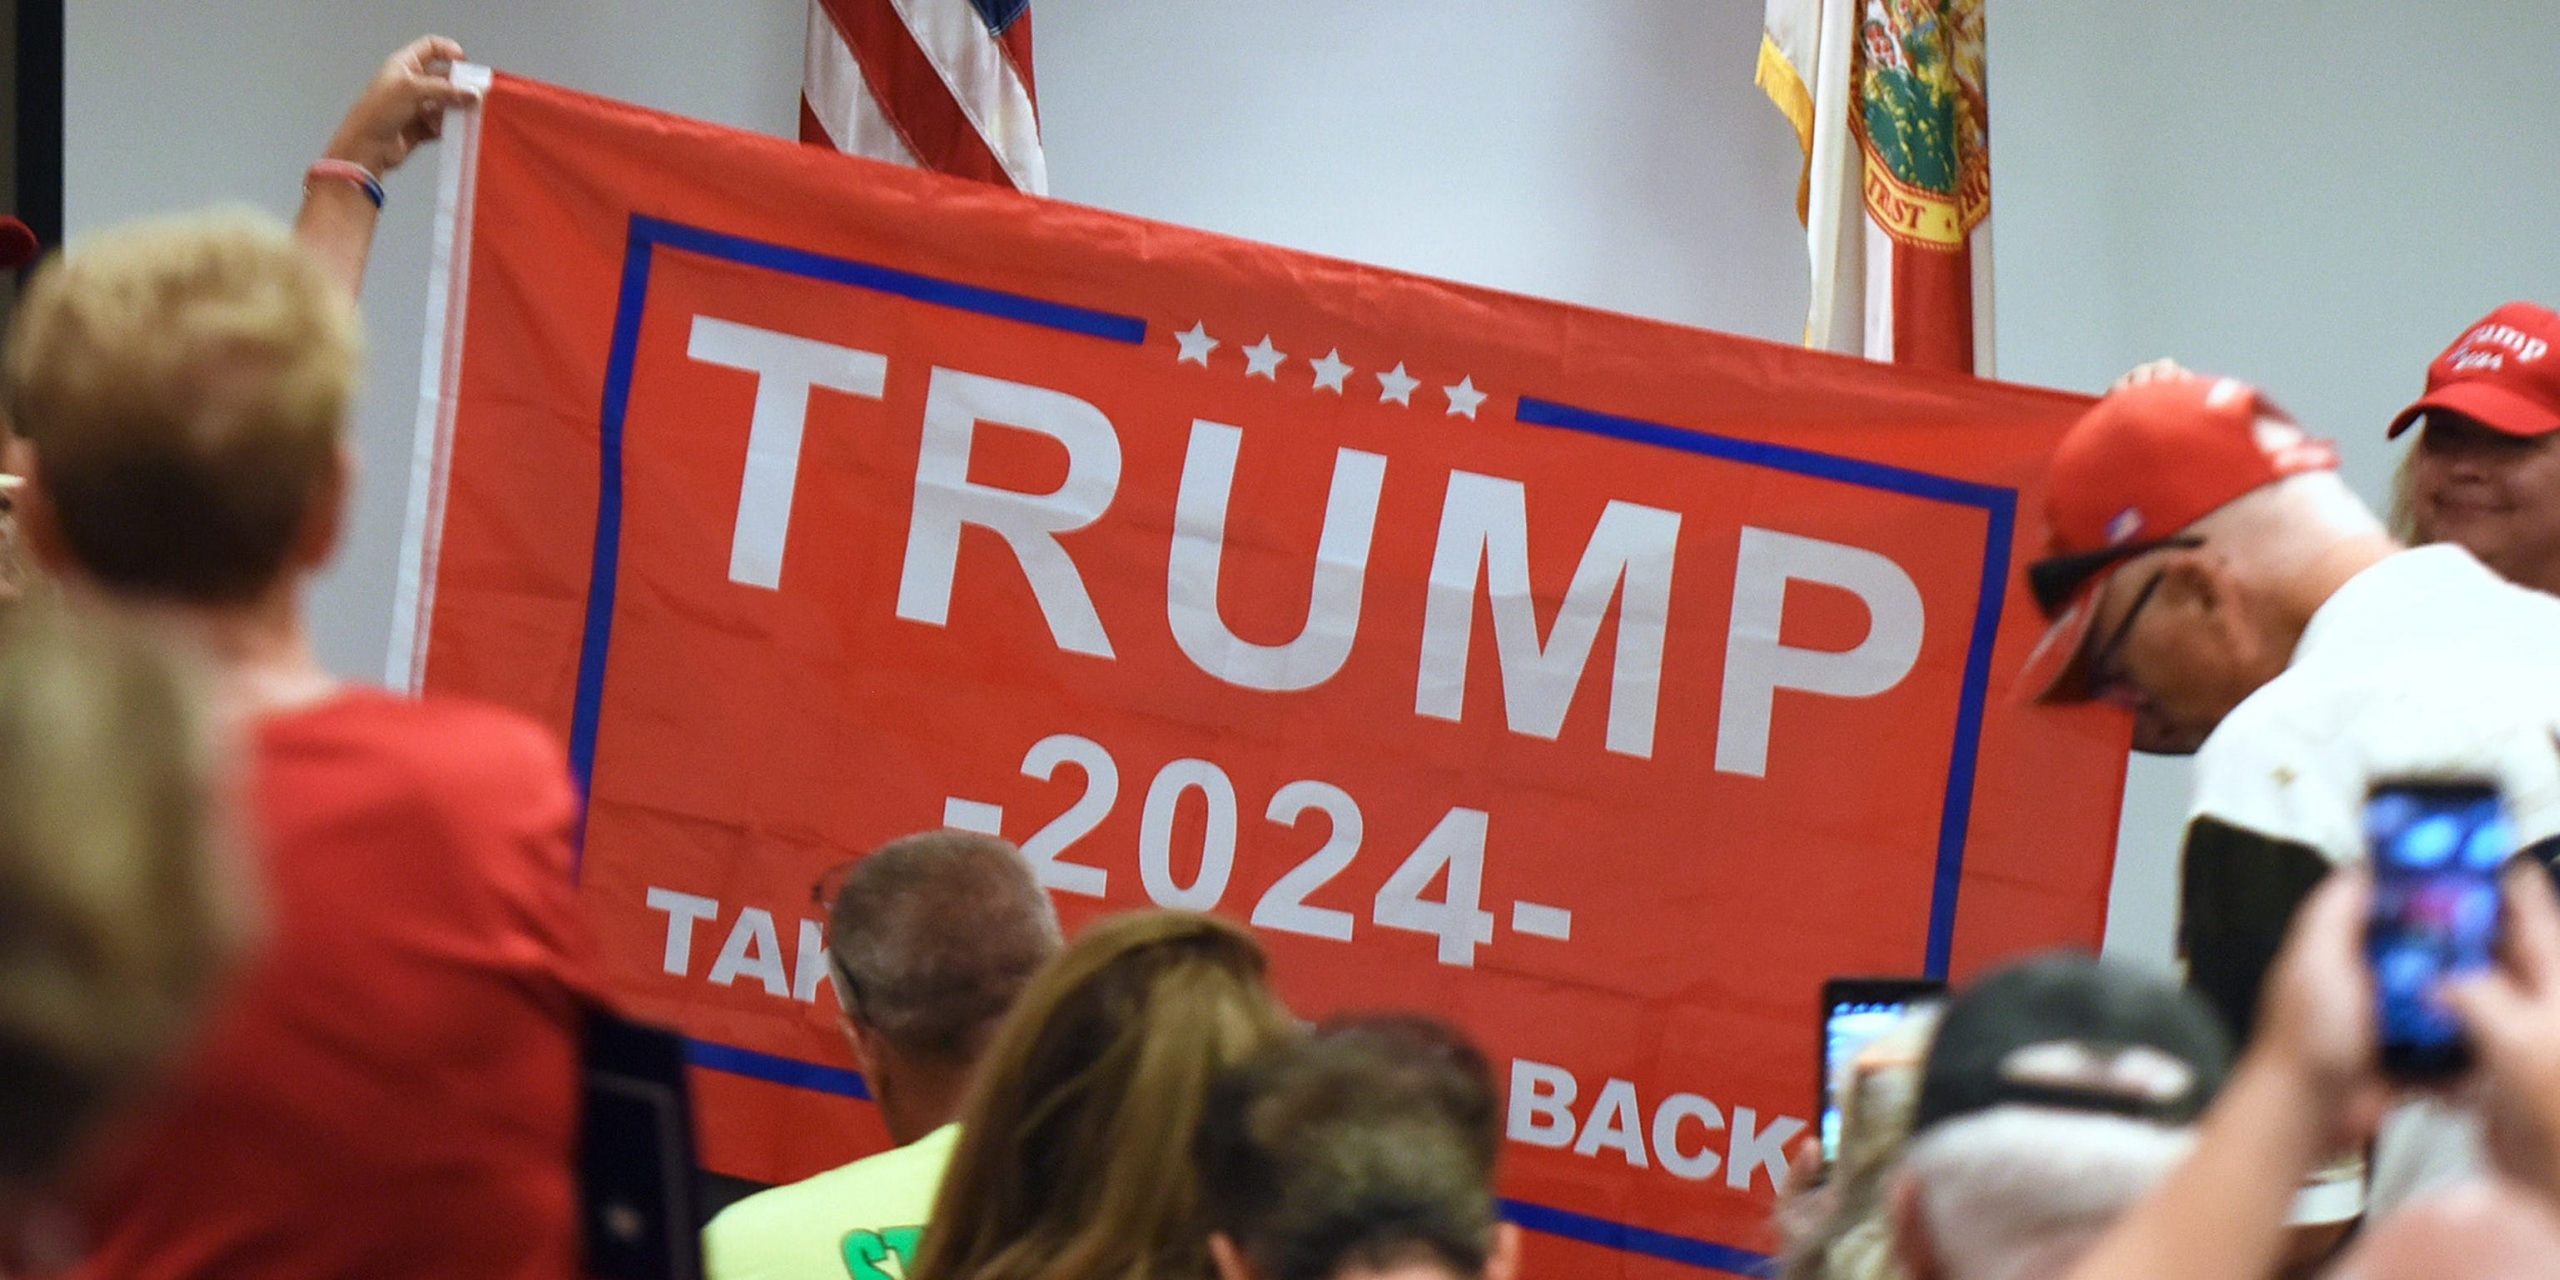 People hold a Trump 2024 flag before U.S. Rep. Matt Gaetz (R-FL) who arrives to address supporters at a Matt Gaetz Florida Man Freedom Tour event at the Hilton Melbourne Beach on July 31, 2021.